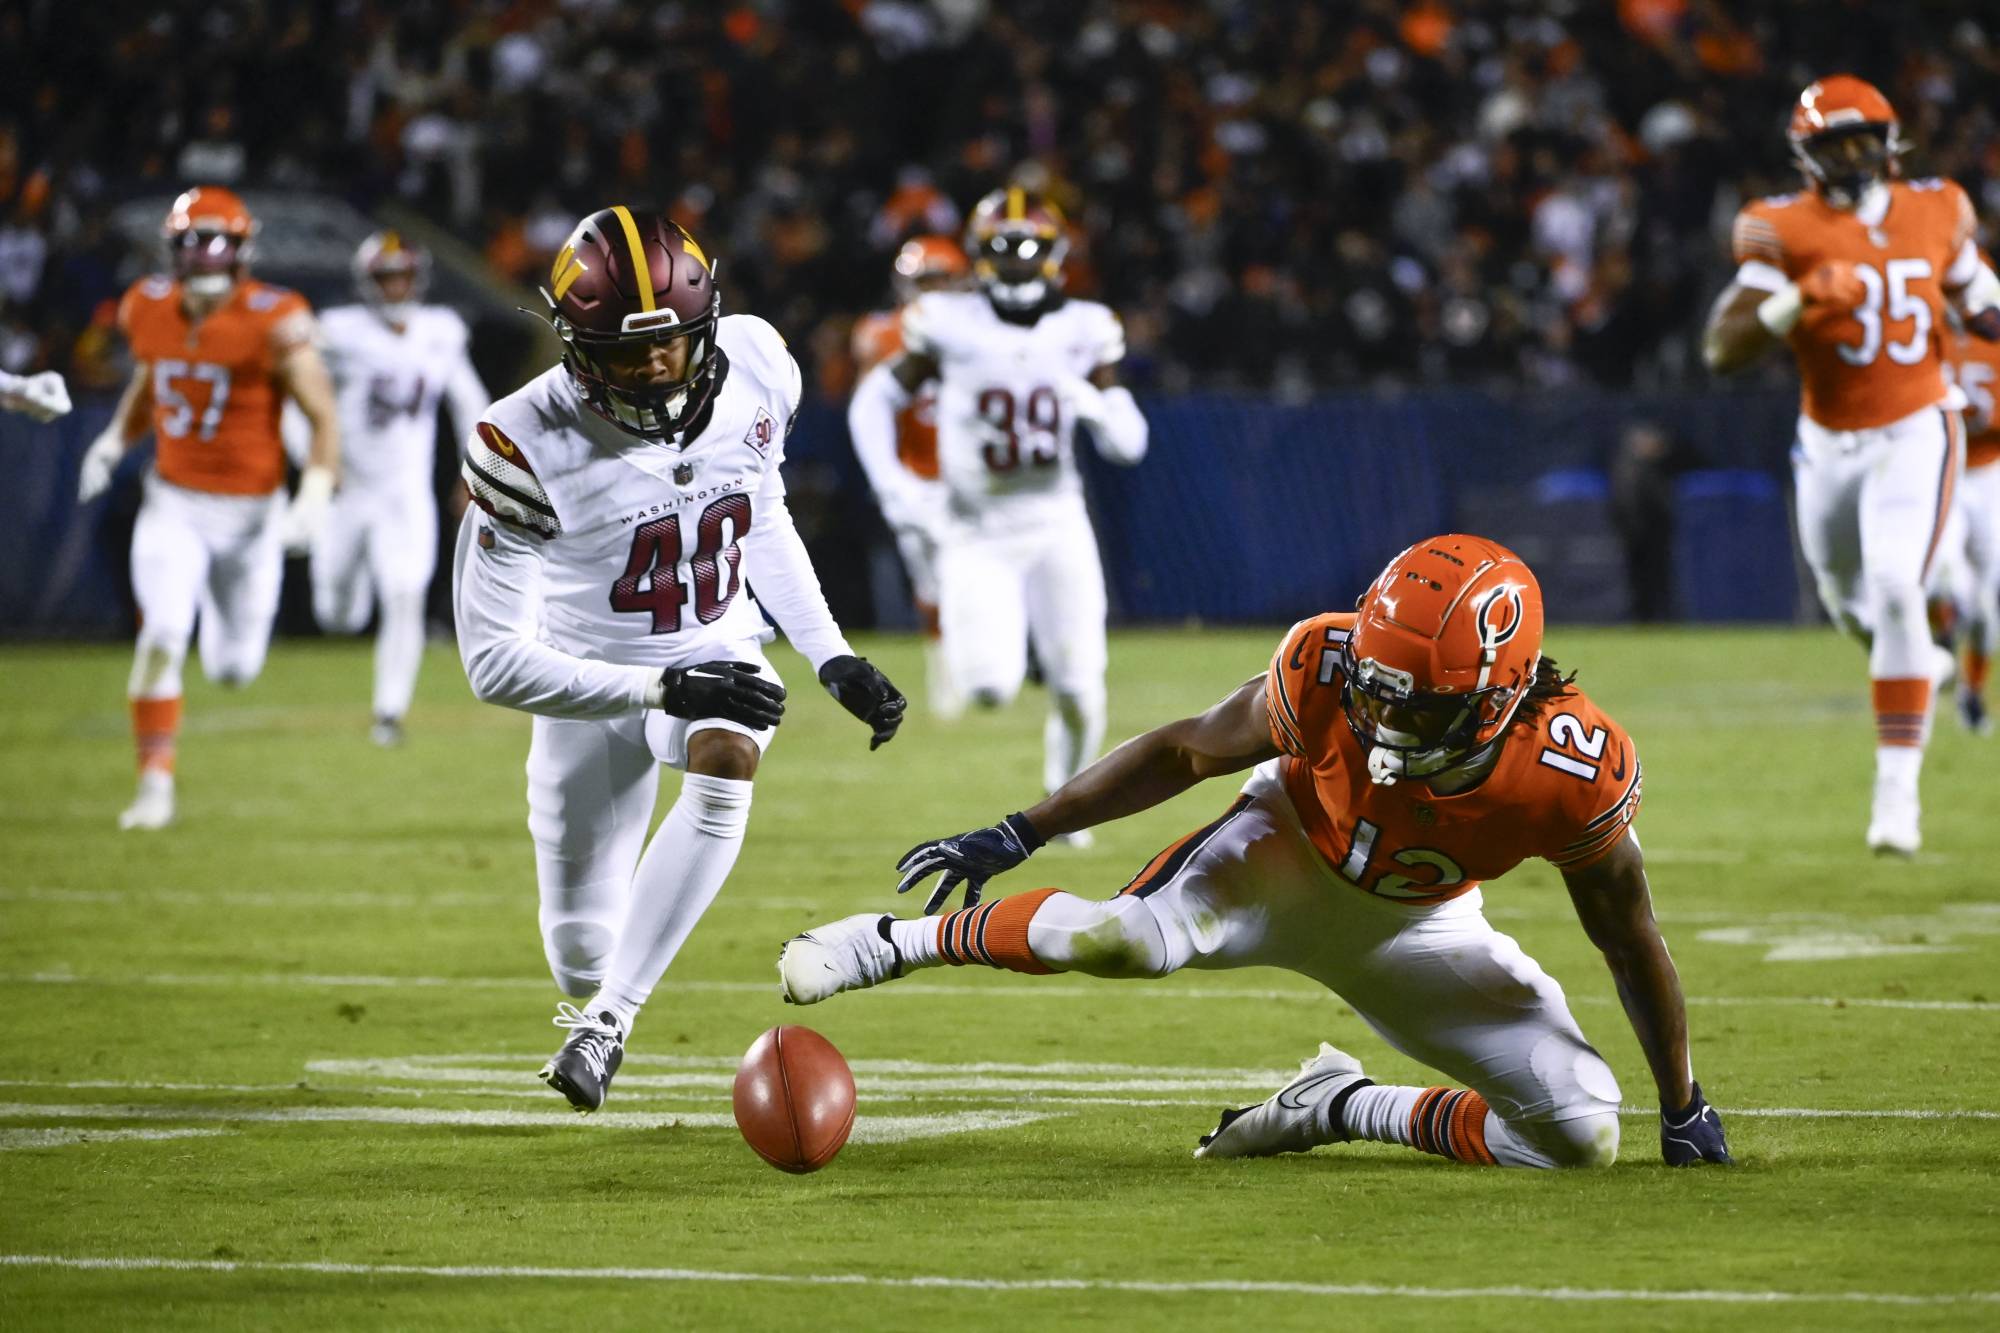 Bears come up inches short in Thursday Night Football loss to